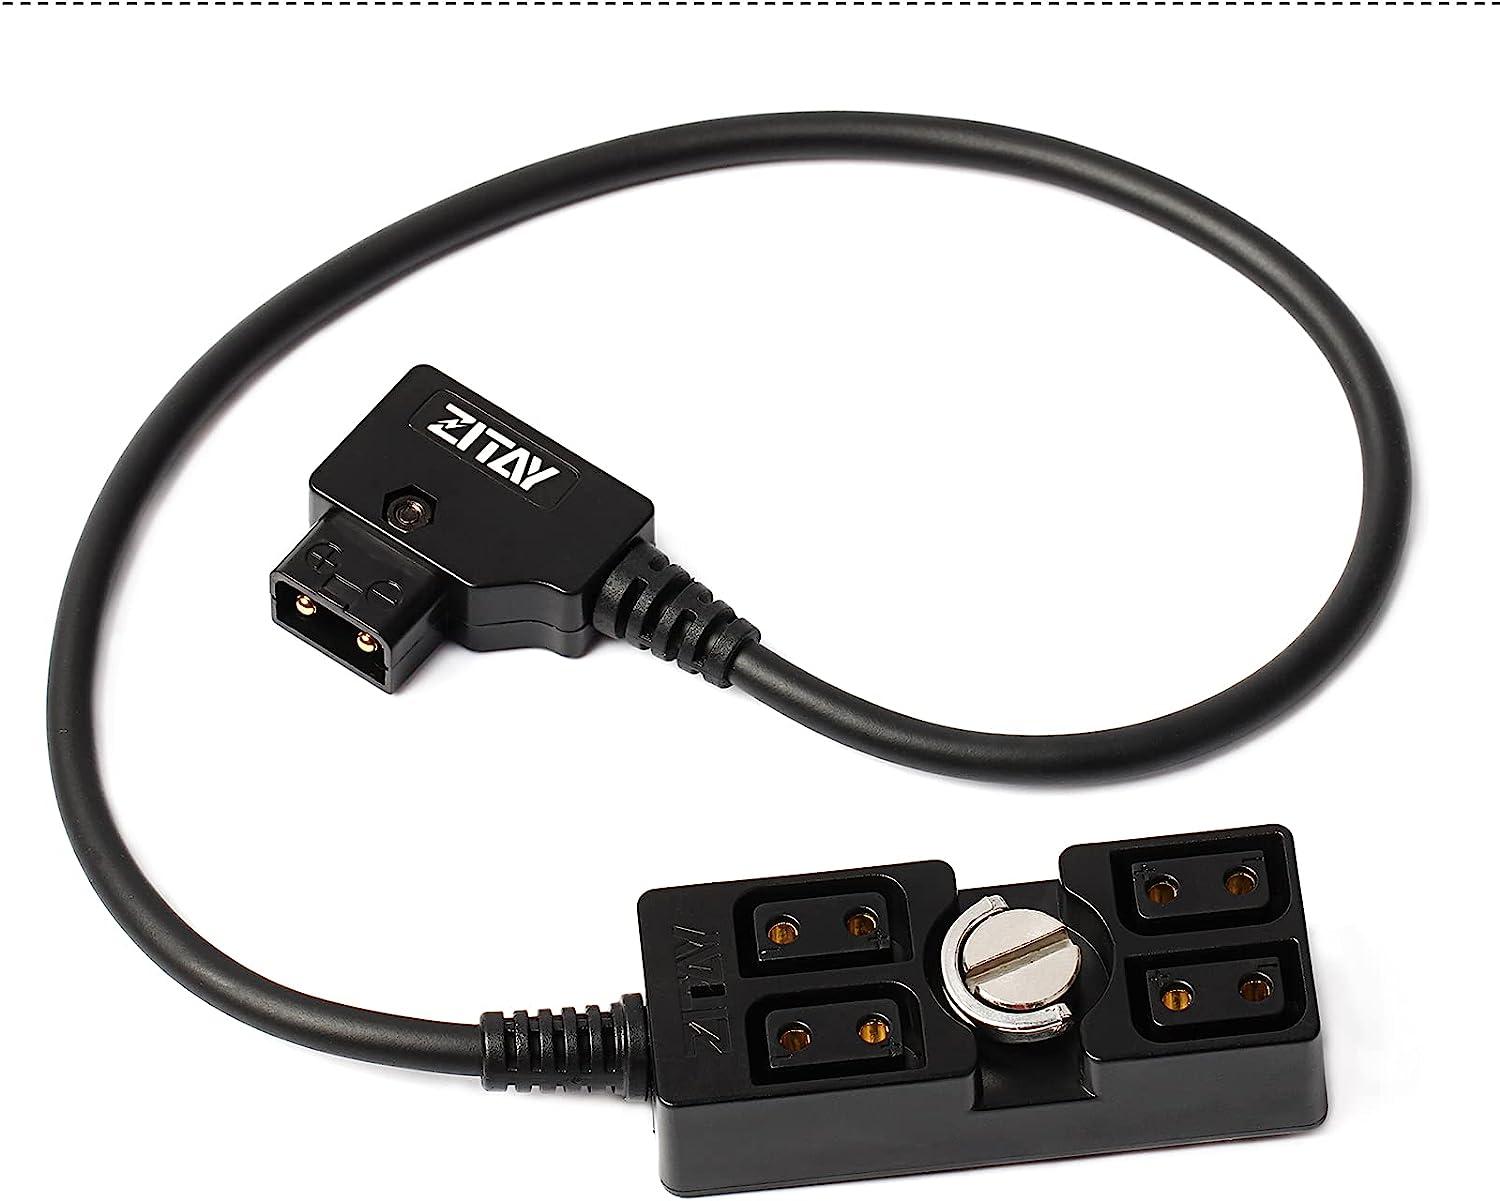 ZITAY D-tap 1x4 Splitter one Male to Four Female Port Adapter